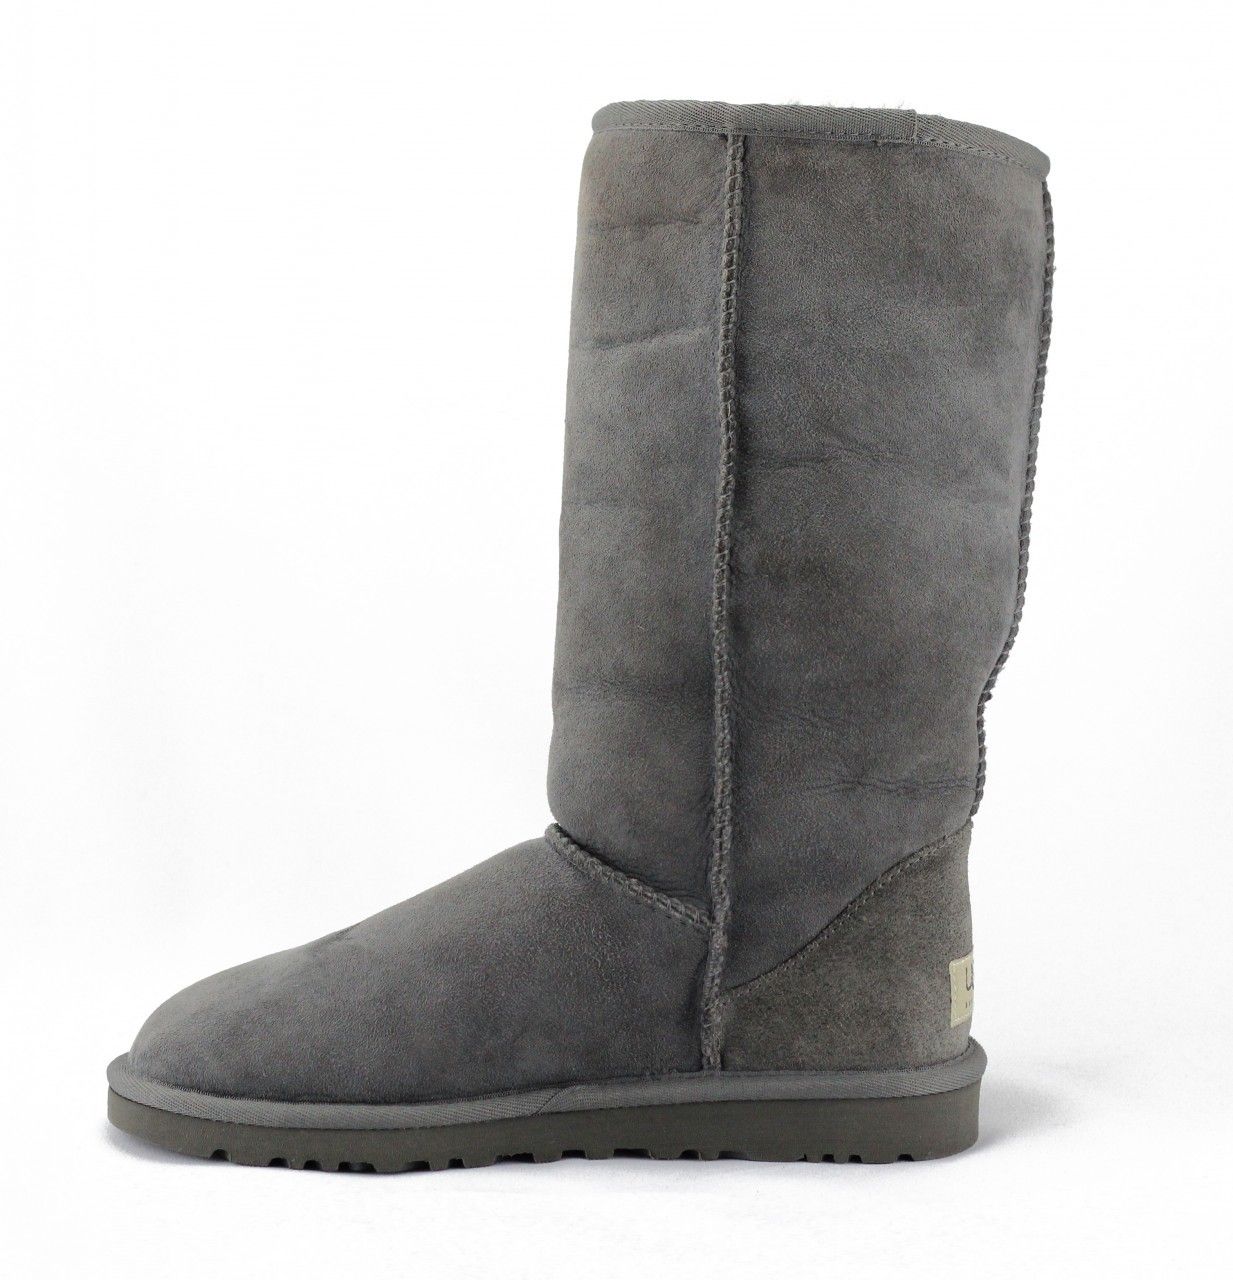 grey tall ugg boots on sale